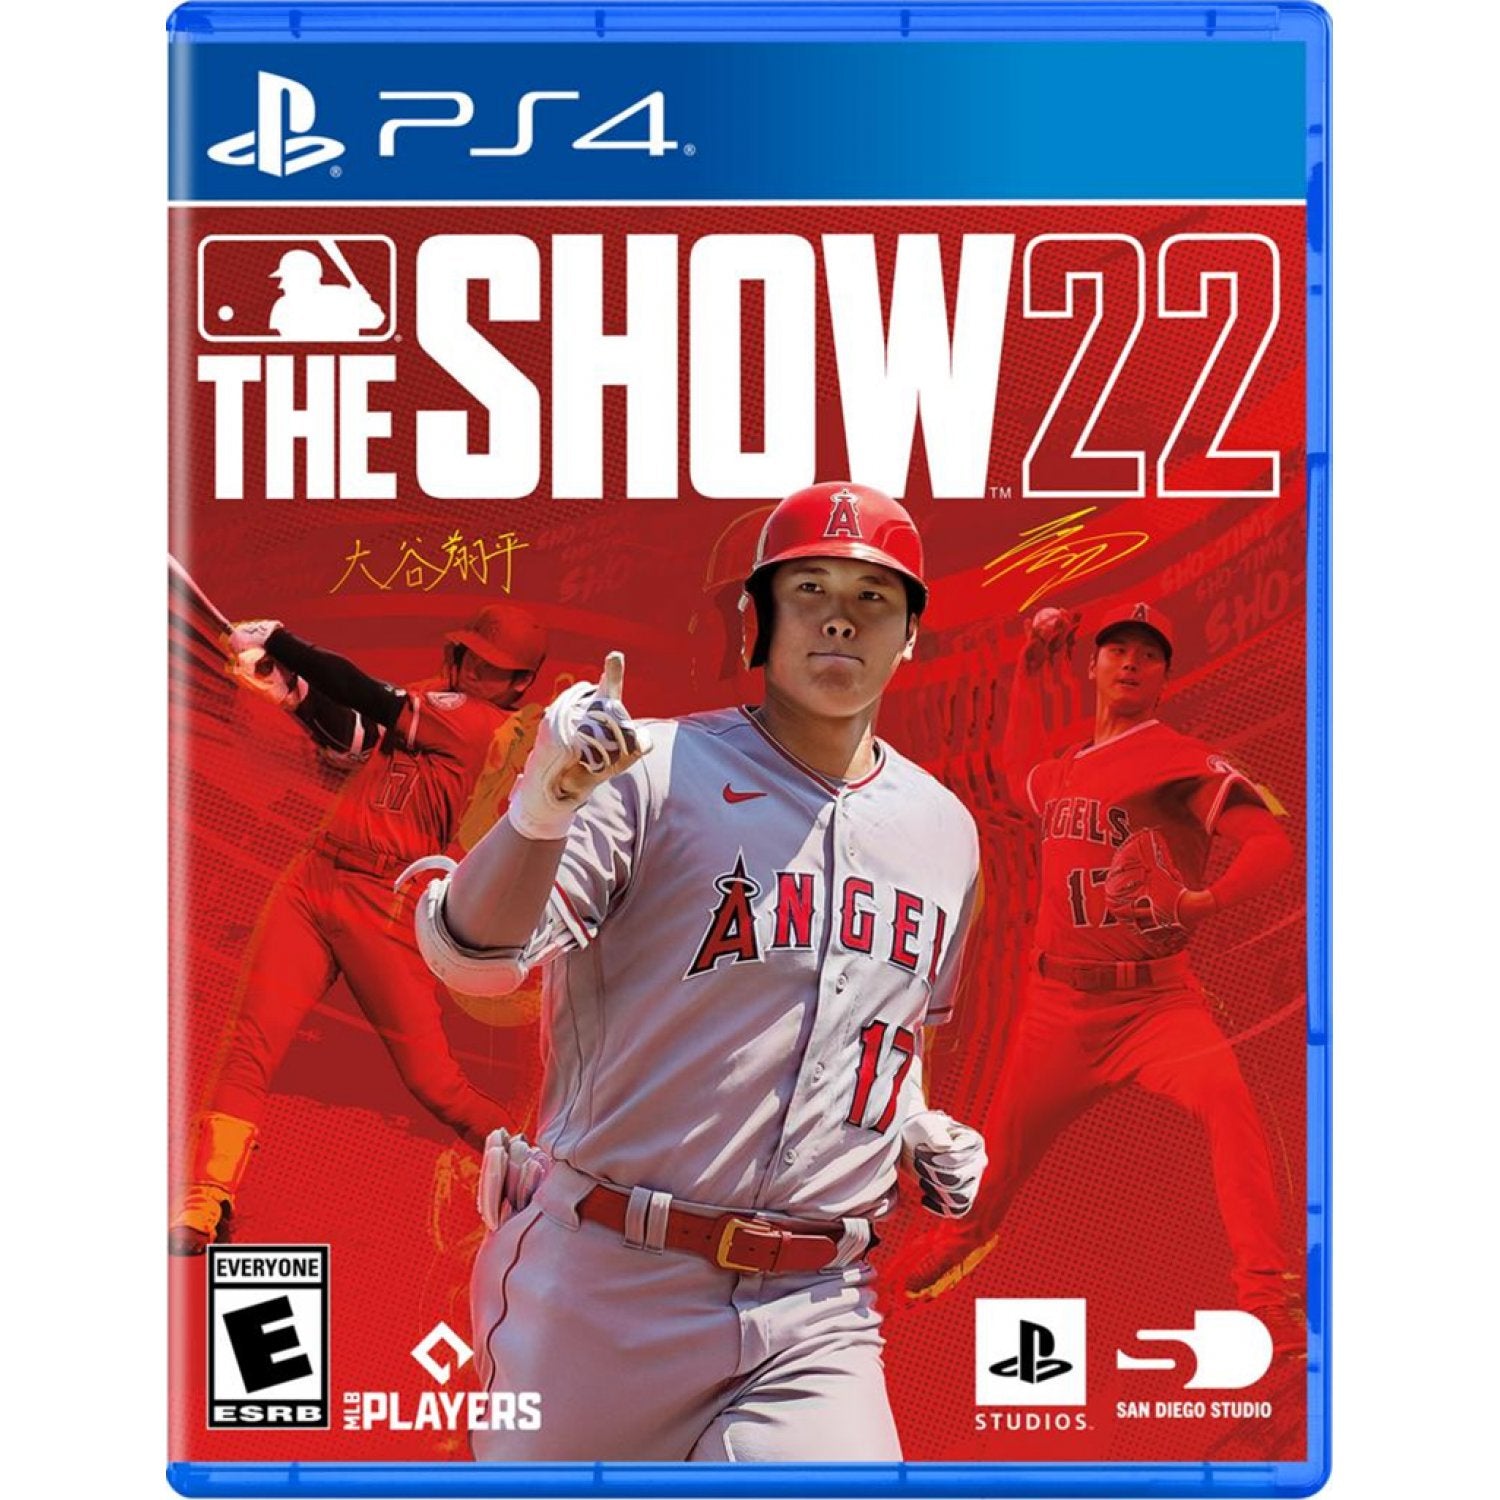 PS4 MLB The Show 22